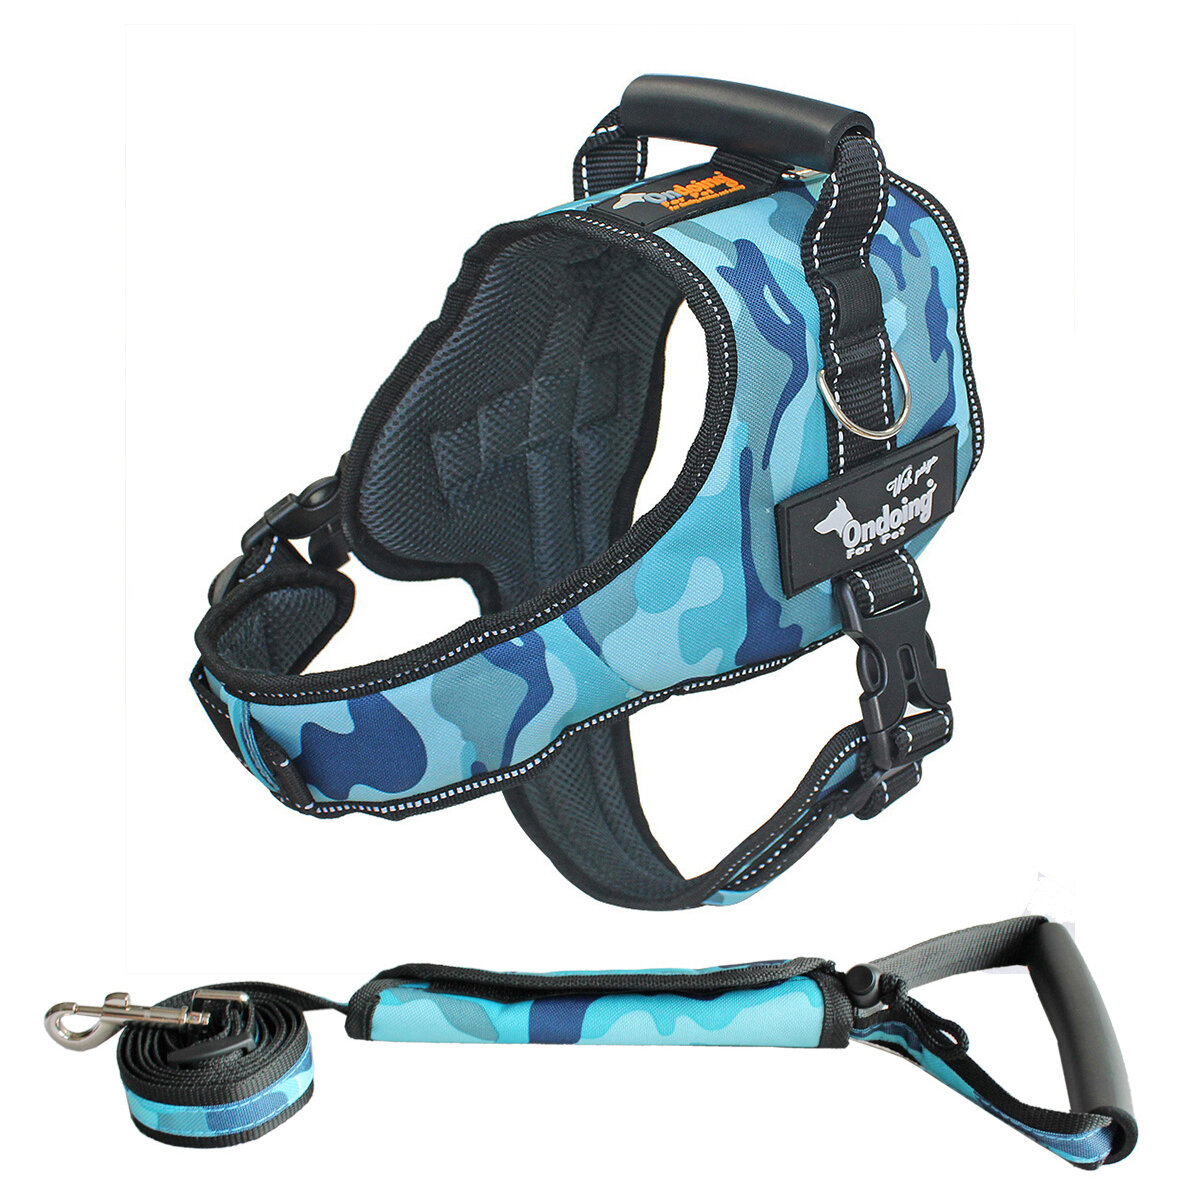 Ondoing Dog Harness Adjustable Pet Vest Harness No Pull Padded Reflective With Leash